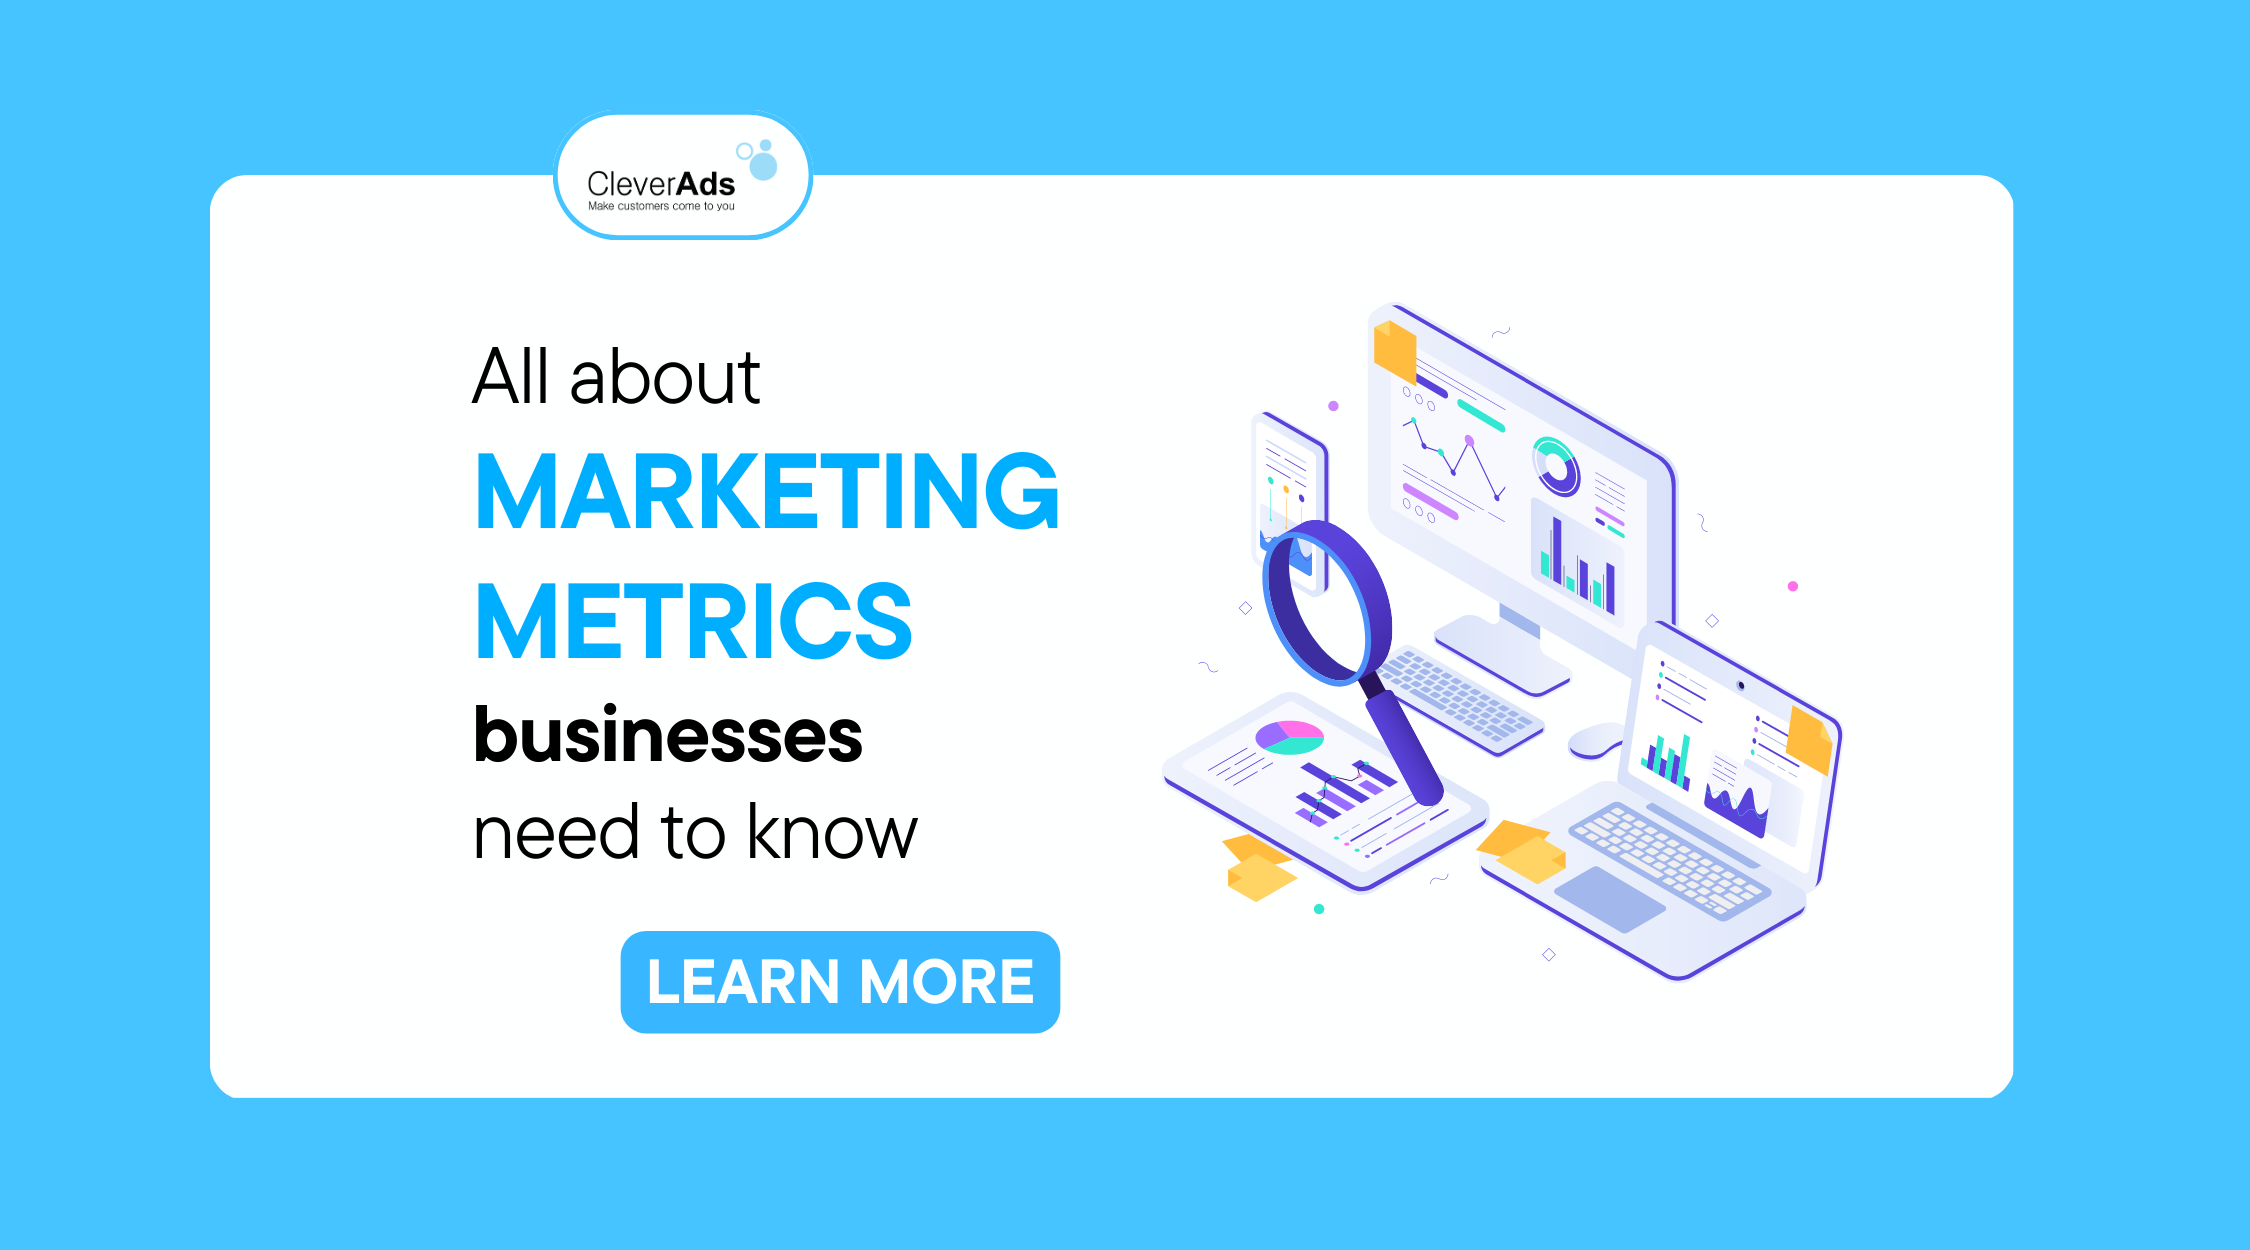 All about marketing metrics businesses need to know